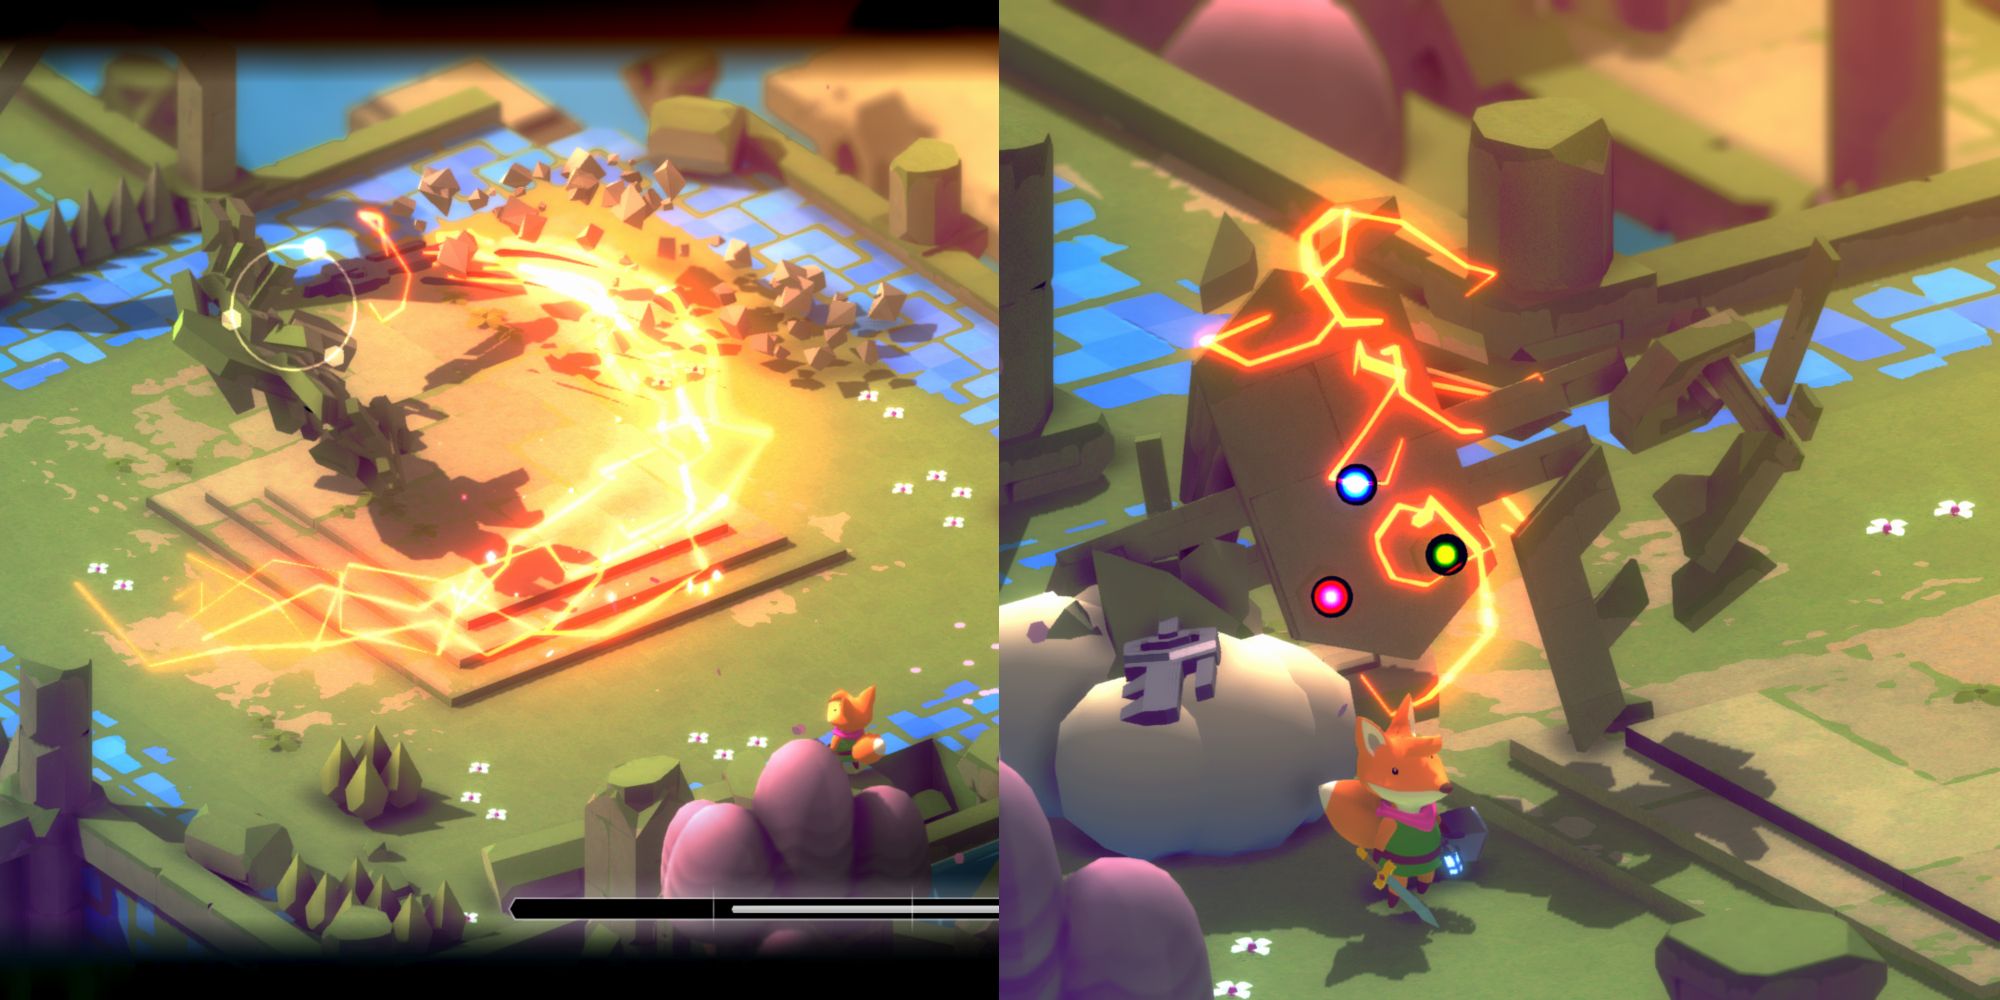 a stone golem swinging a sword in a wide arc, leaving an electric trail in its wake; the same golem crumbling in a cloud of electric sparks while a small red fox looks away from it